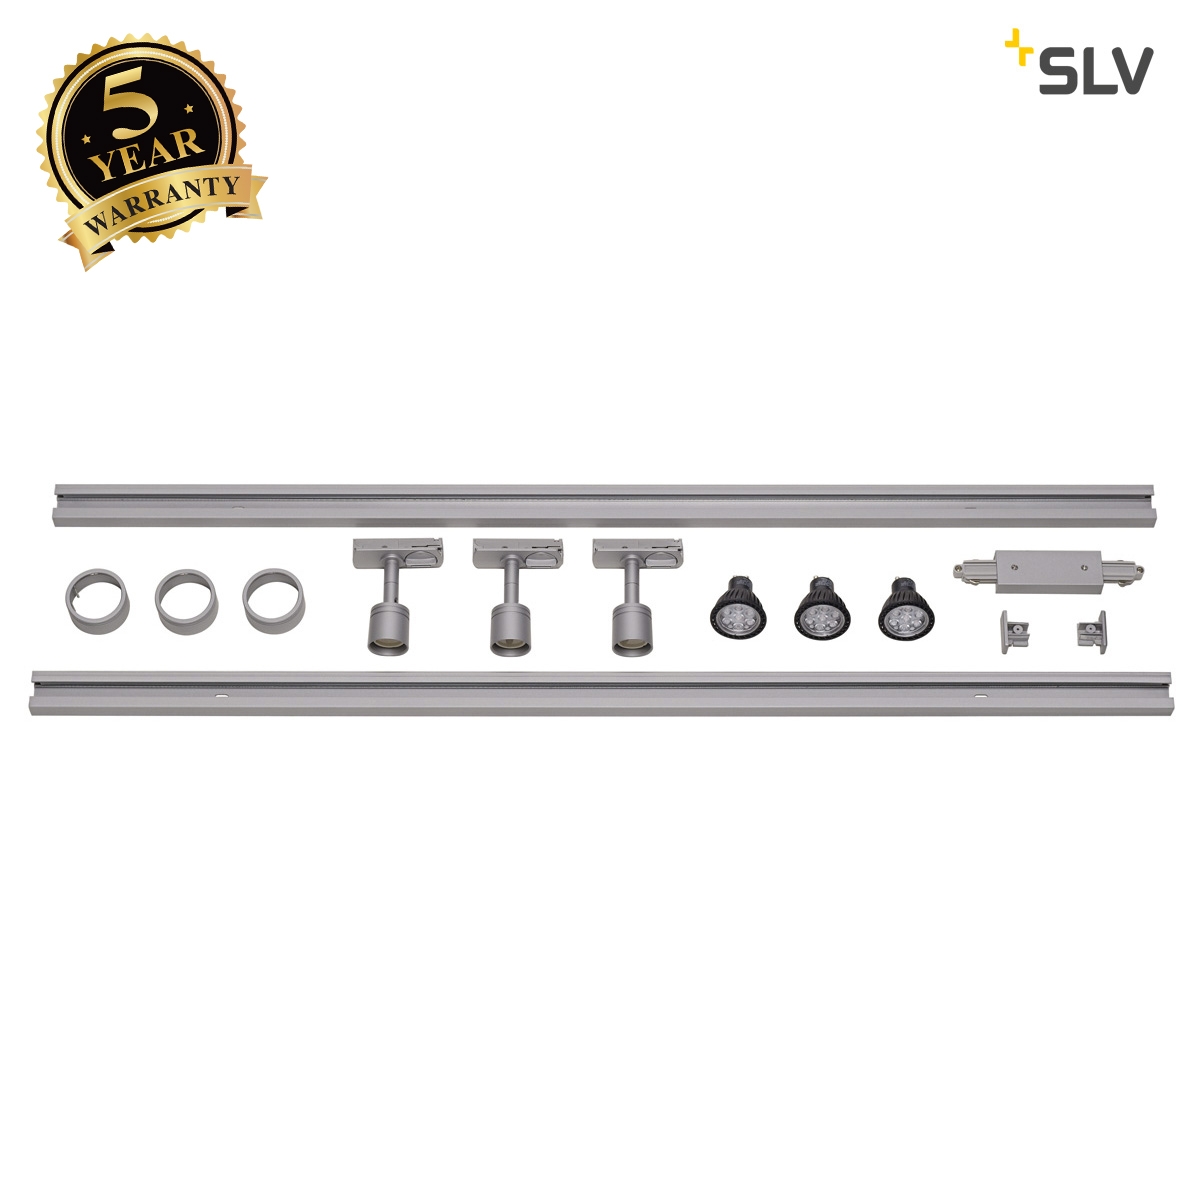 SLV 1-CIRCUIT TRACK SET, 2x 1m, incl. 3x PURI and 3x 4.3W LED lamp, silver-grey 143194